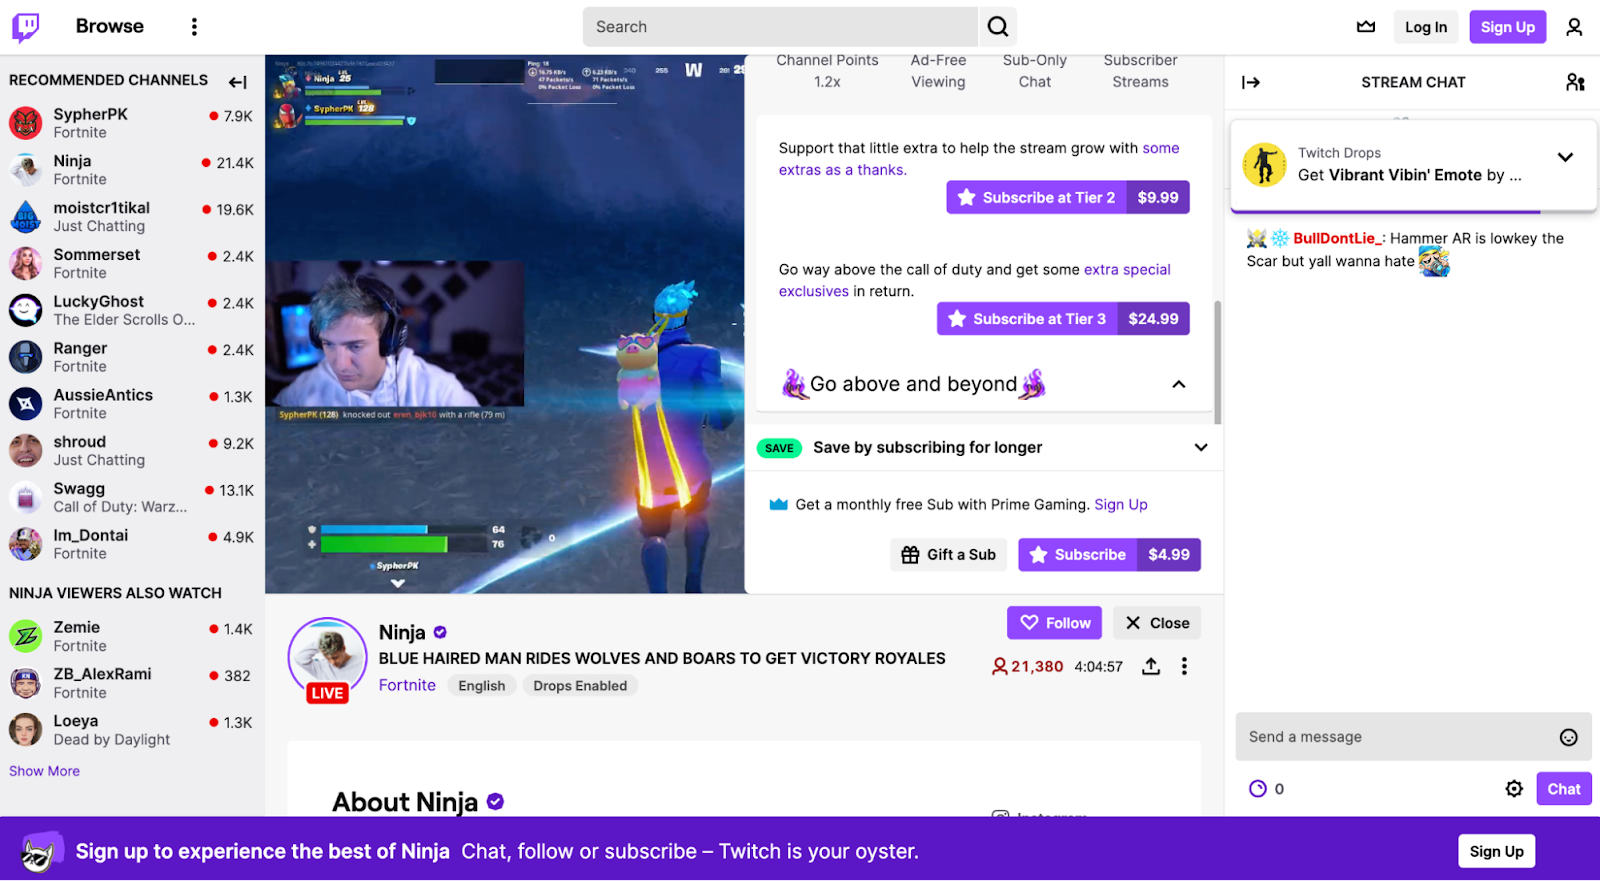 Ninja’s Twitch channel, featuring a list of recommended channels.